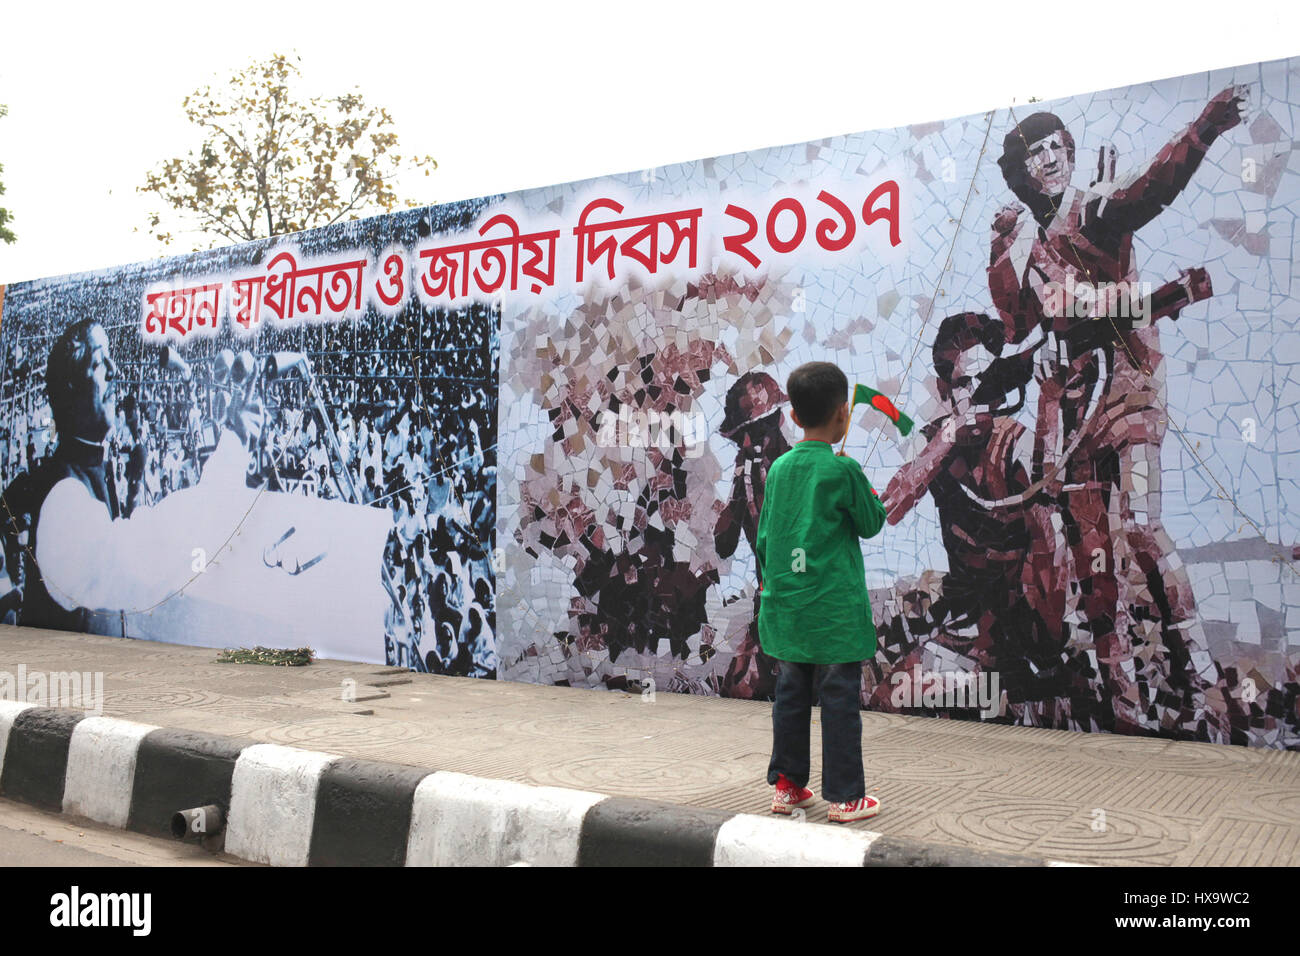 Dhaka, Bangladesh. 26th Mar, 2017. 26 March 2017 Dhaka, Bangladesh ''“ A Bangladeshi children hold a national flag and to see the wallstreet painting during the nation celebrate 46 Independence Day on 26 March 2017 Dhaka, Bangladesh. In 1971 when the Pakistani occupation forces kicked off one of the worst genocides in history that led to a nine-month war for the independence of Bangladesh in 1971. © Monirul Alam Credit: Monirul Alam/ZUMA Wire/Alamy Live News Stock Photo